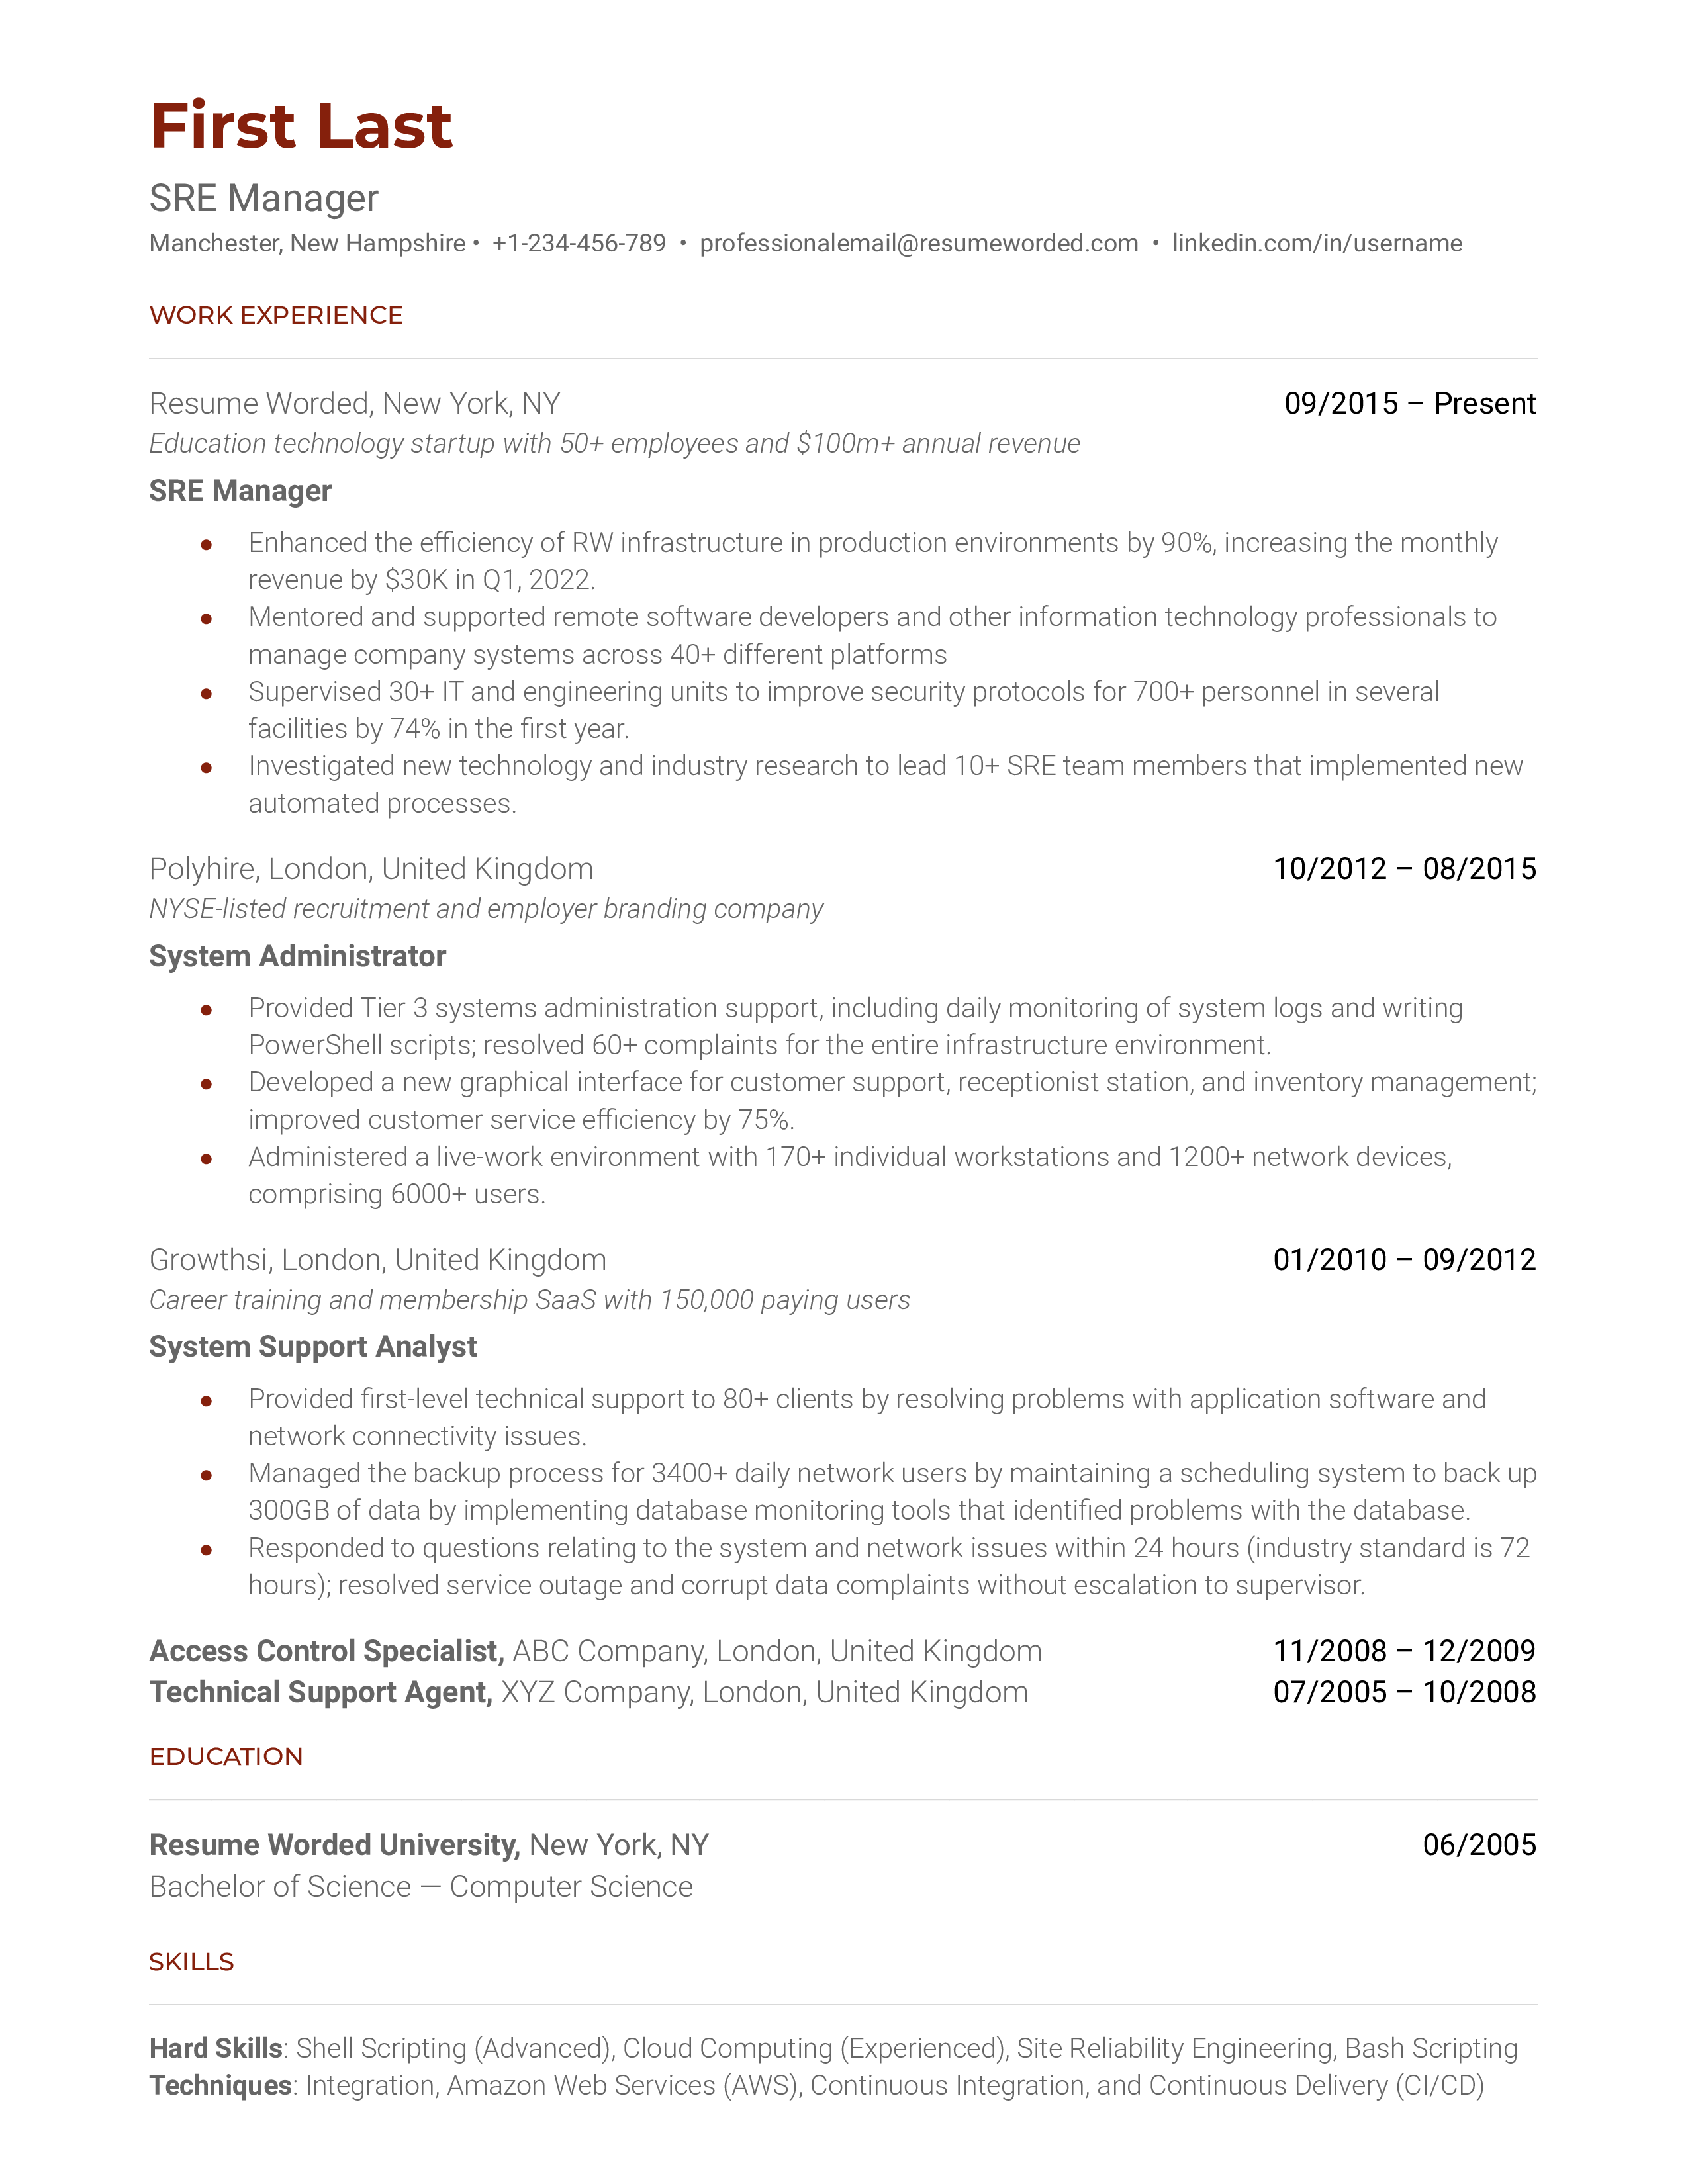 A SRE manager resume template focused on relevant industry experience.